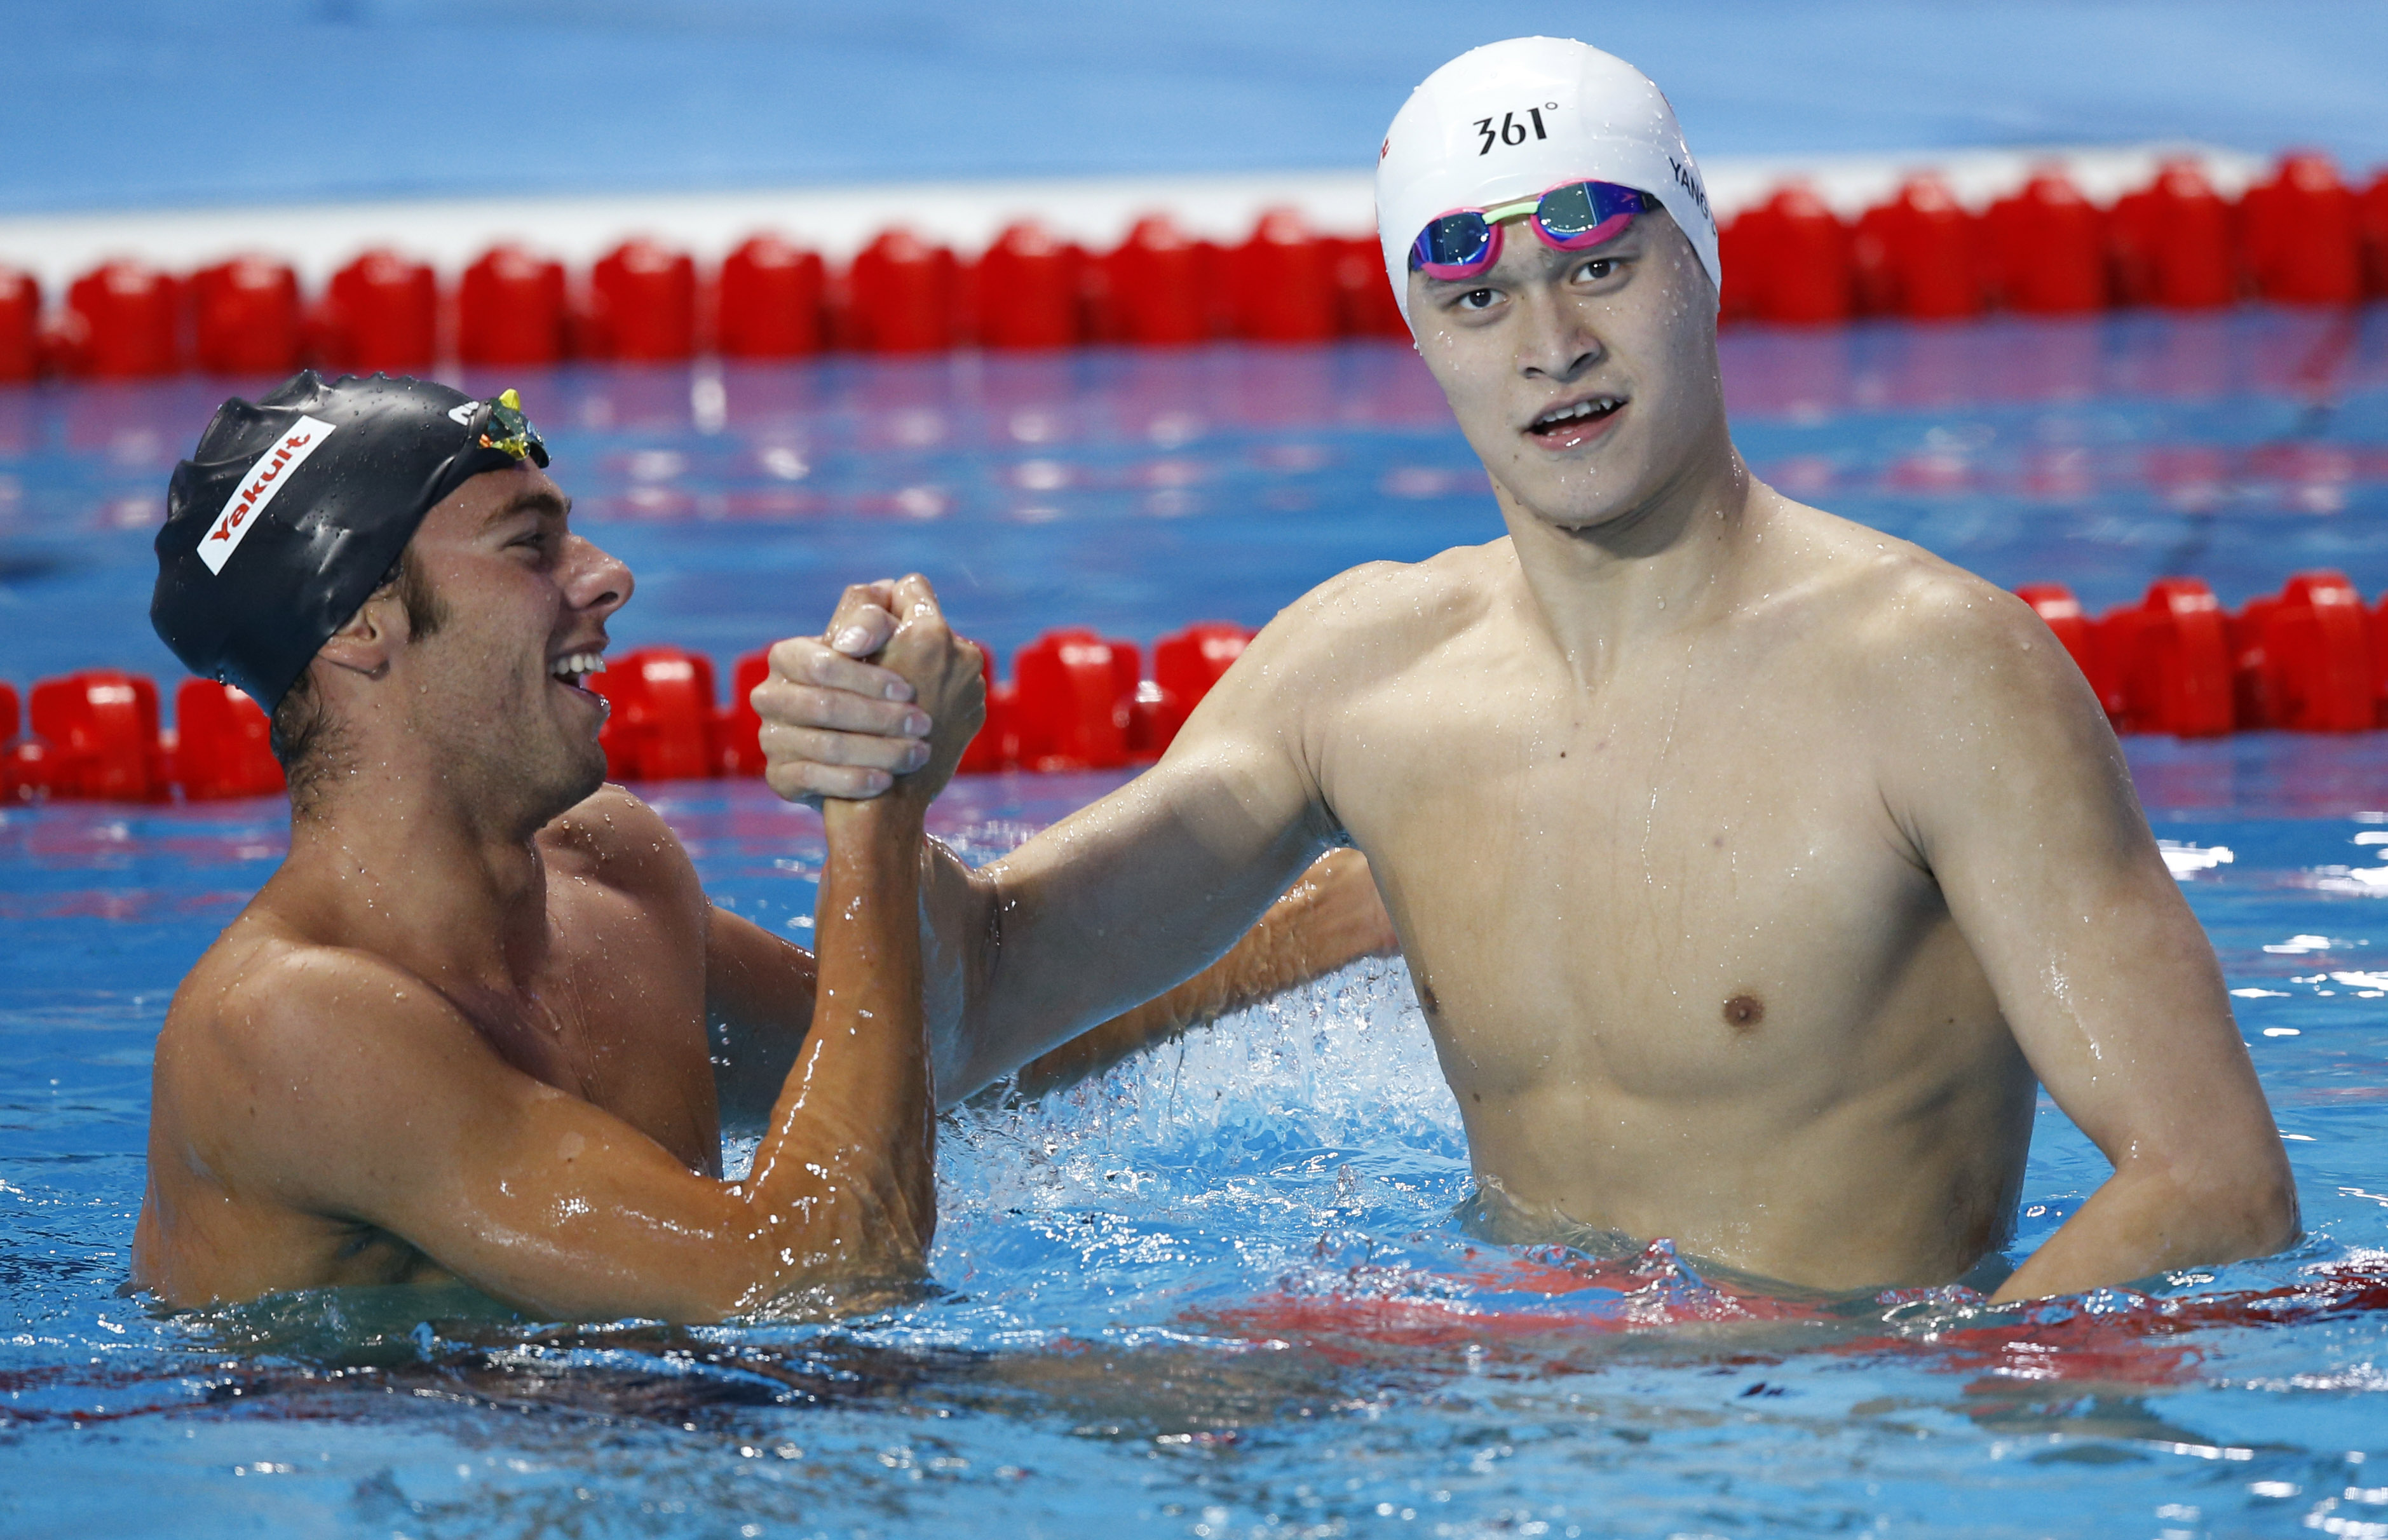 China's gold medal winner Sun Yang (right) is congratulated by Italy's Gregorio Paltrinieri after the men's 800m freestyle final at the Swimming World Championships in Kazan. Photo: AP